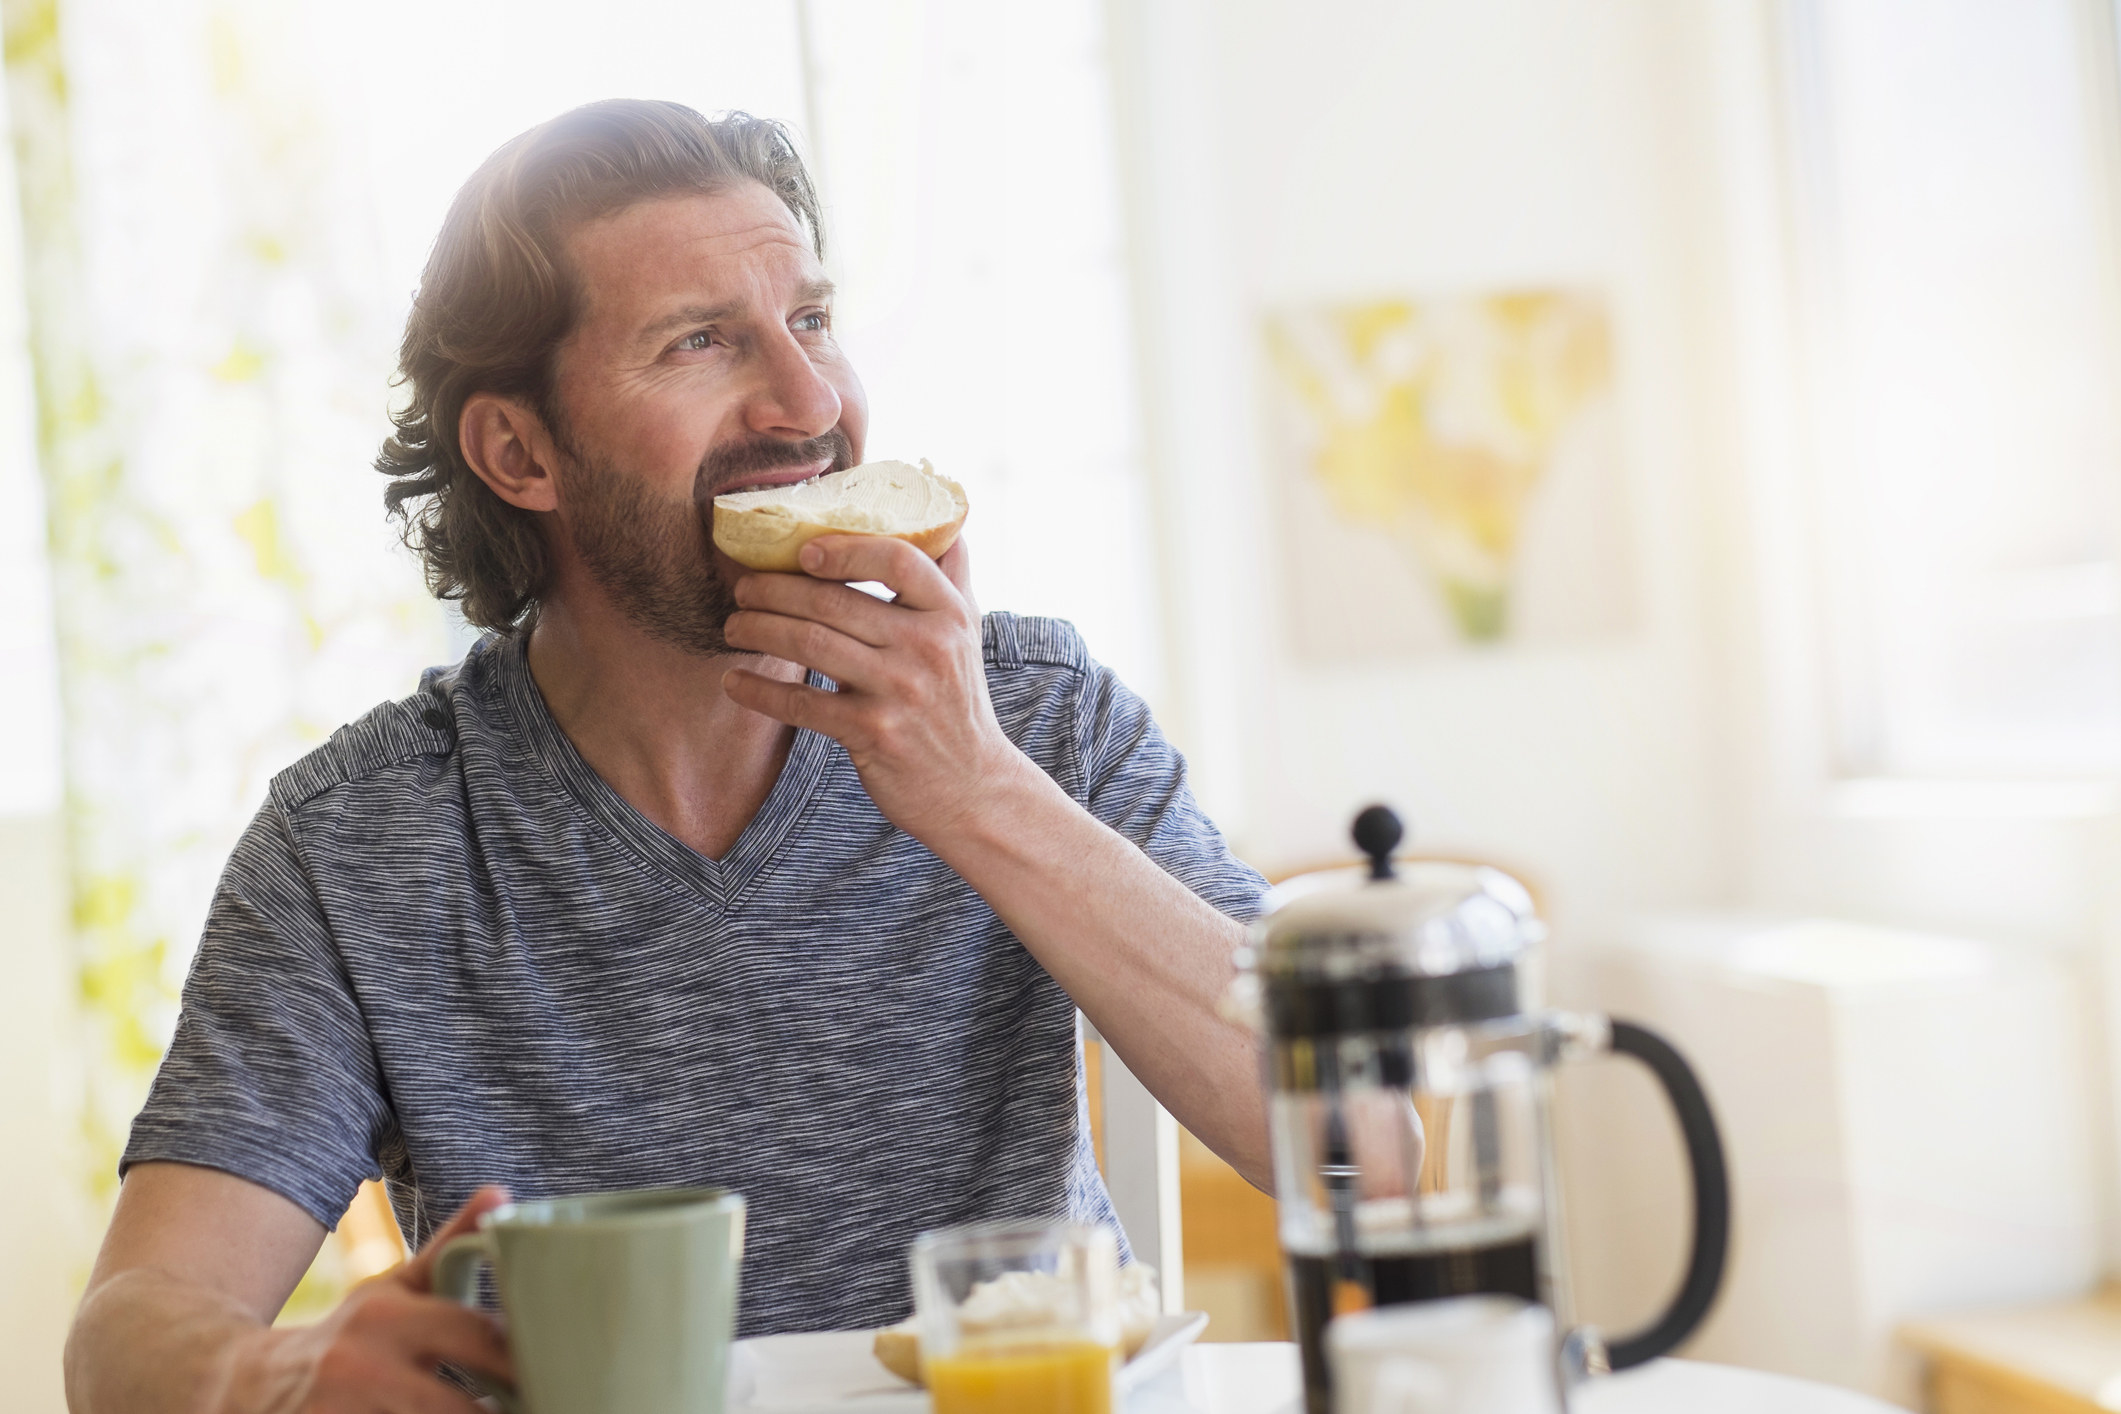 Man eating bread while drinking coffee